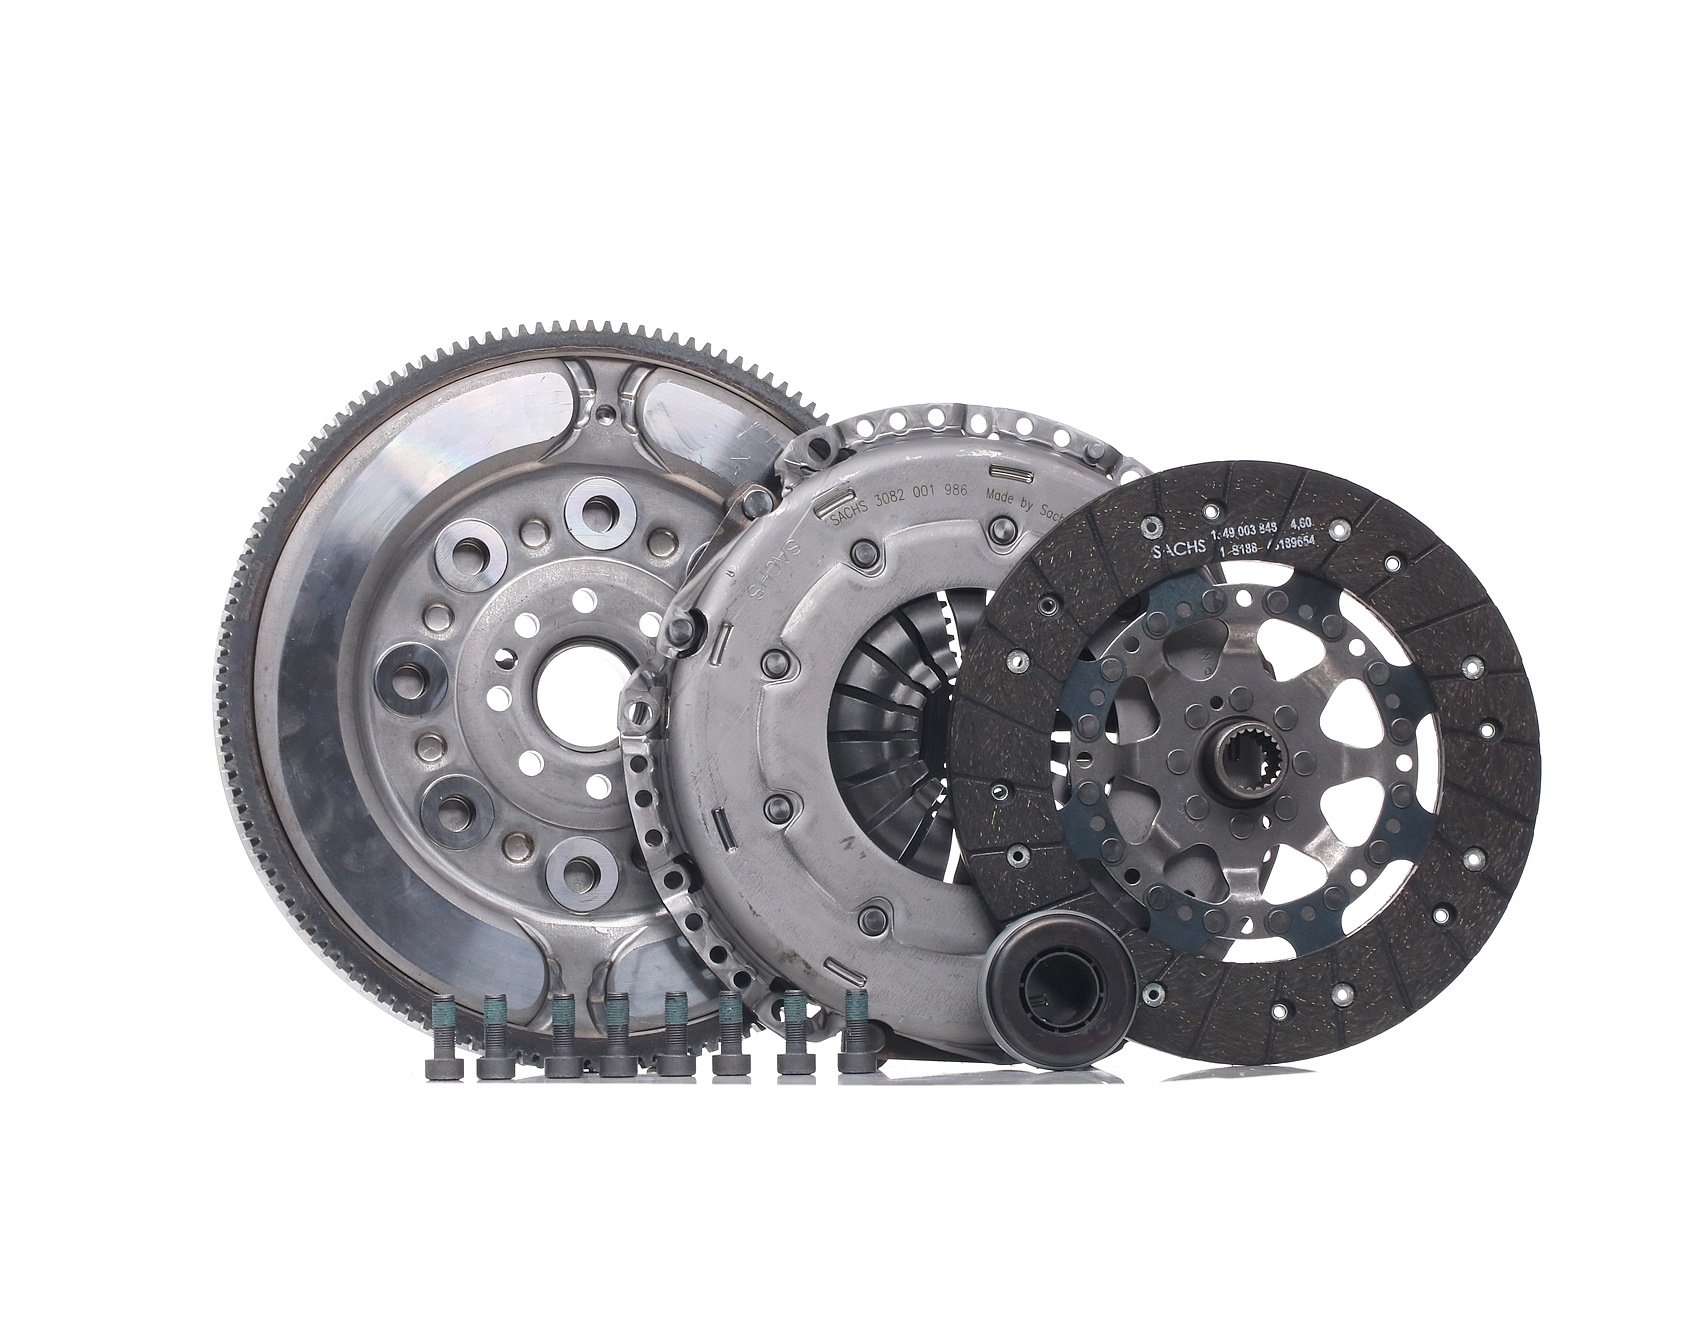 SACHS 2290 601 106 Clutch kit with clutch pressure plate, with dual-mass flywheel, with flywheel screws, with clutch disc, with clutch release bearing, 235mm